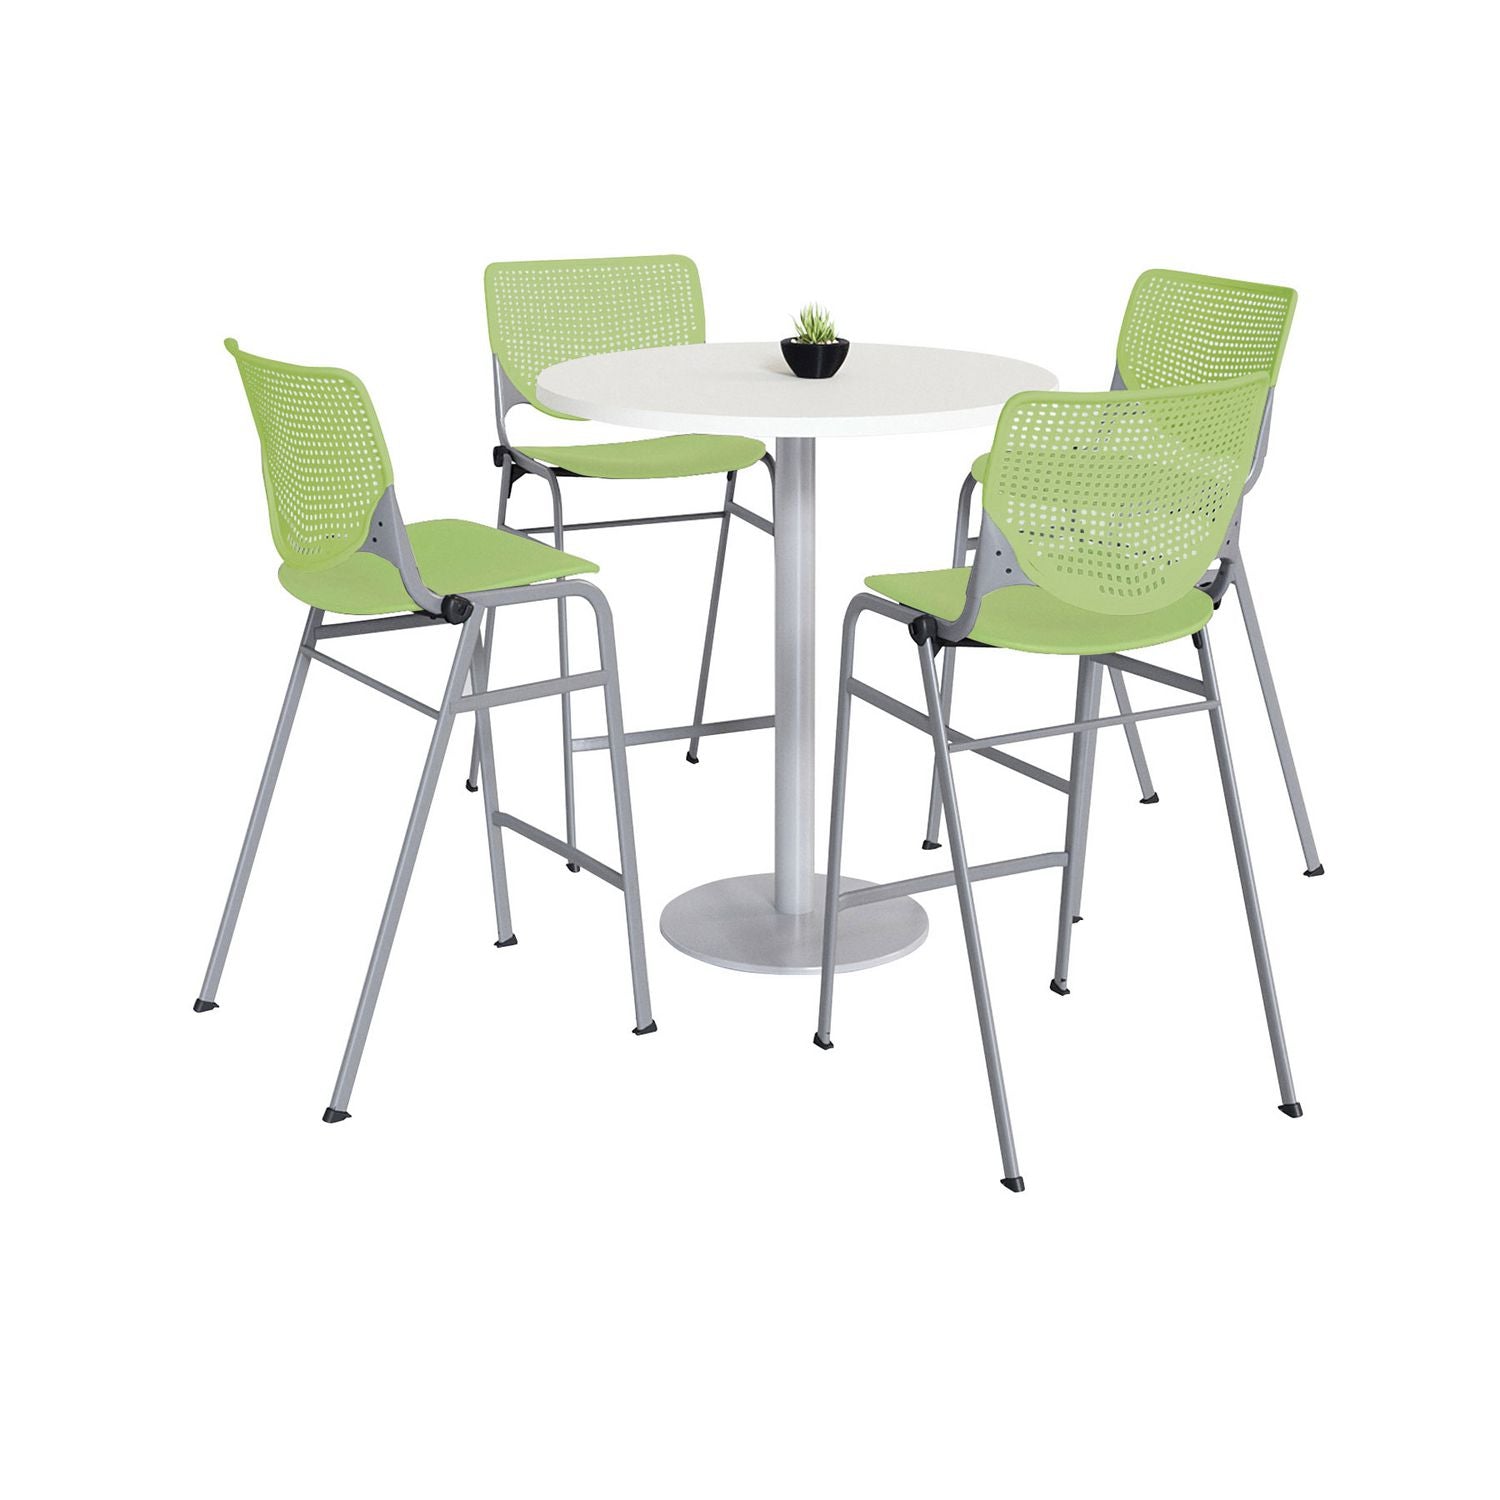 pedestal-bistro-table-with-four-lime-green-kool-series-barstools-round-36-dia-x-41h-designer-white-ships-in-4-6-bus-days_kfi811774037112 - 1